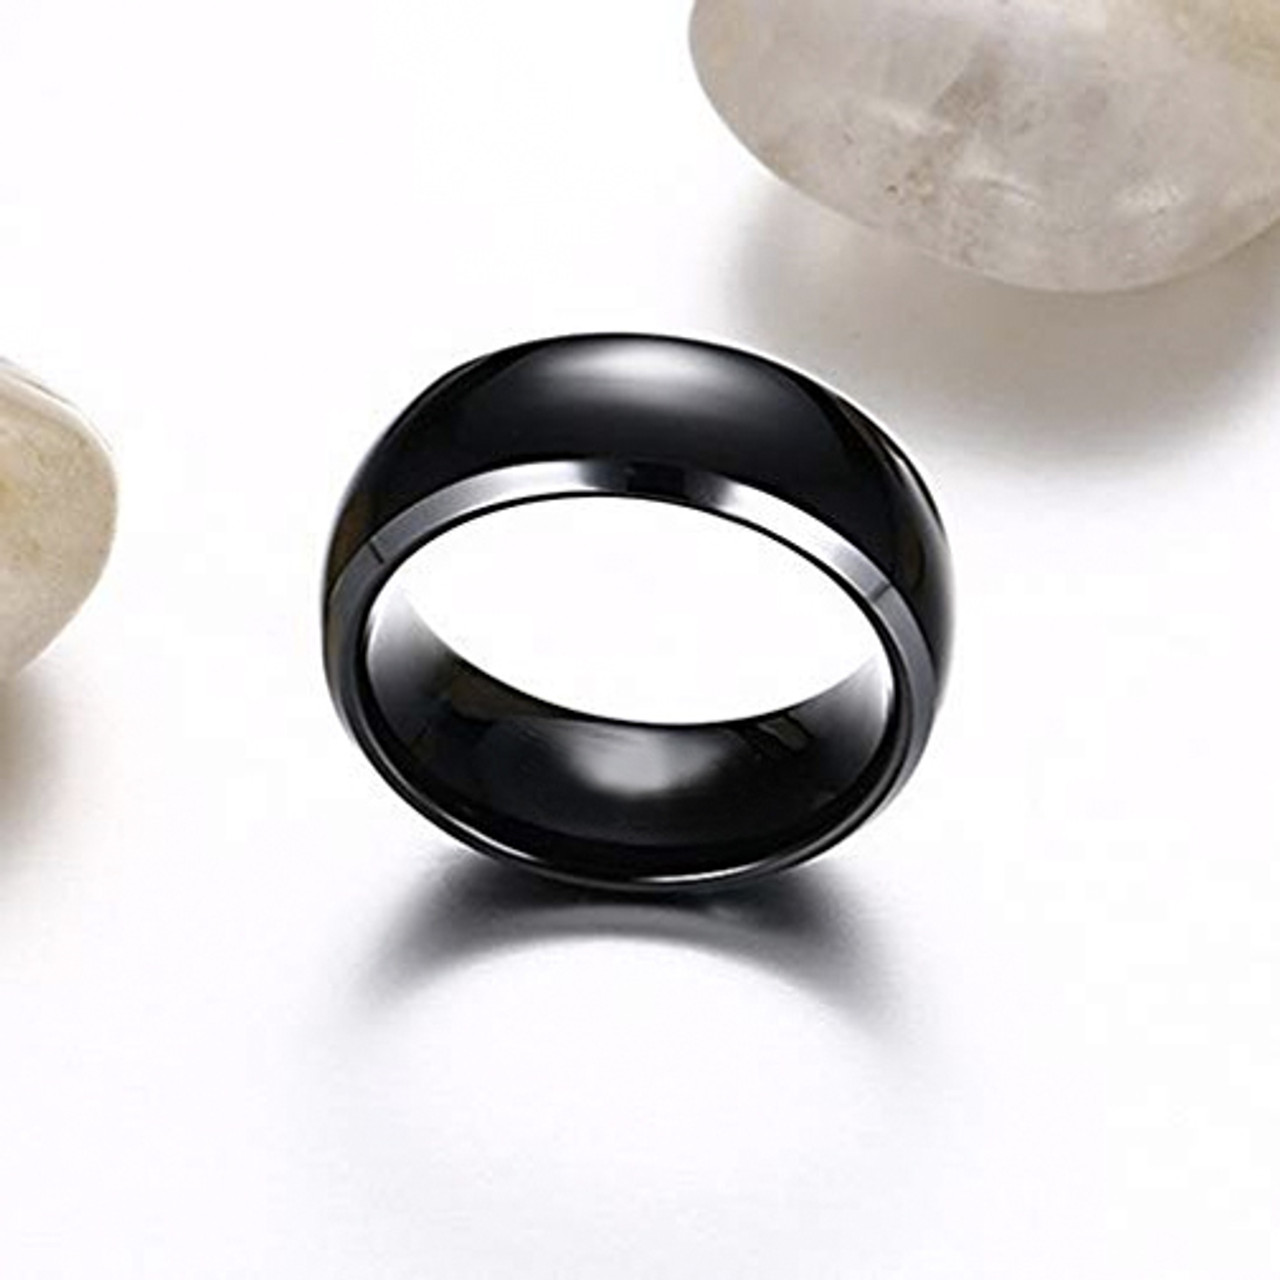 (8mm) Unisex or Men’s Titanium Wedding Ring Bands. Two Tone Black and Silver High Polish, Comfort Fit and Light Weight Ring.